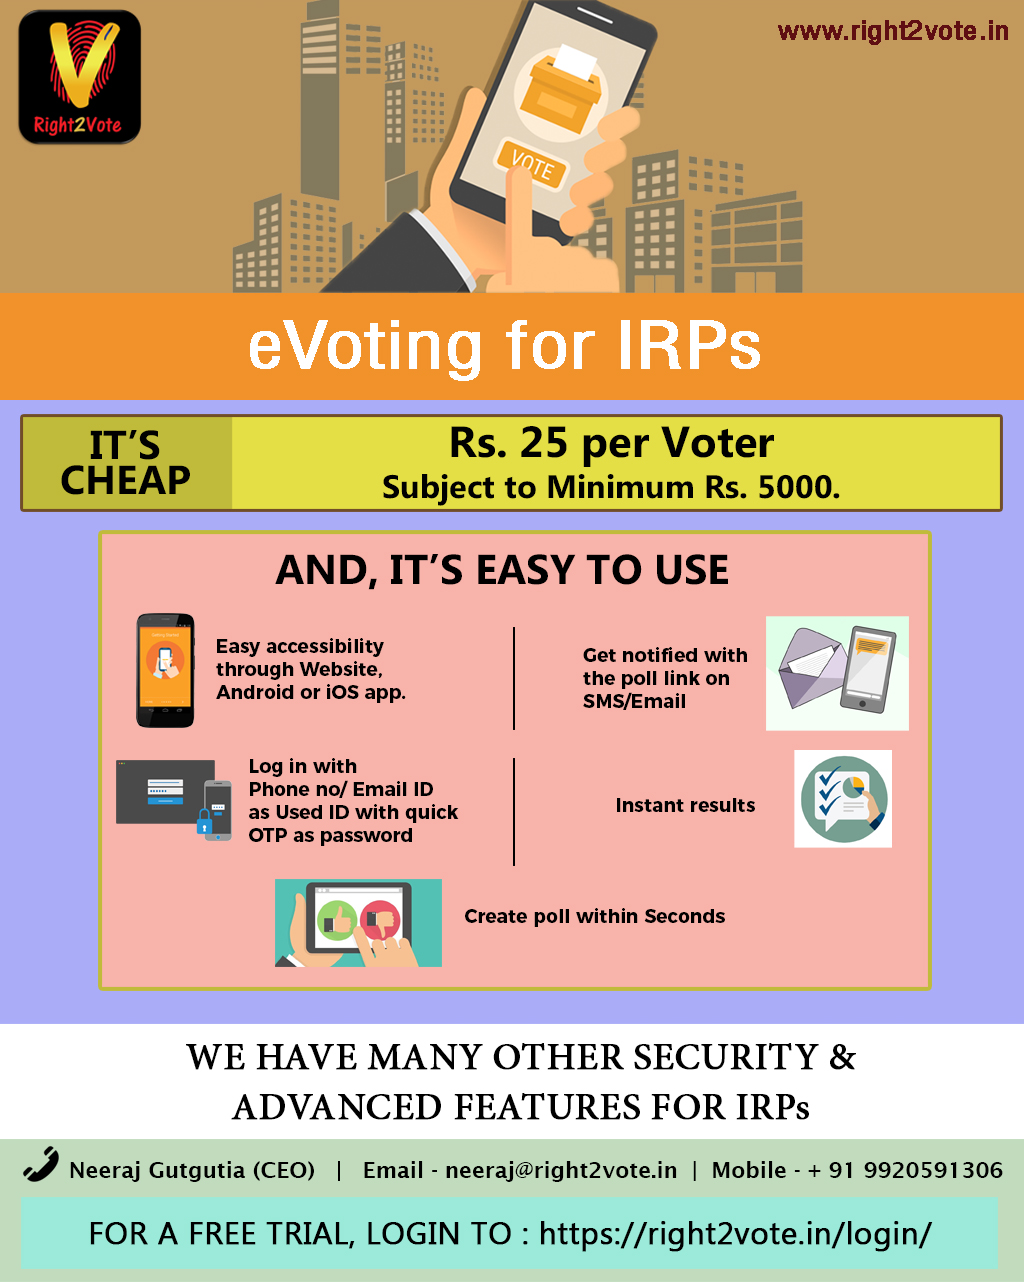 eVoting-for-irp.jpg